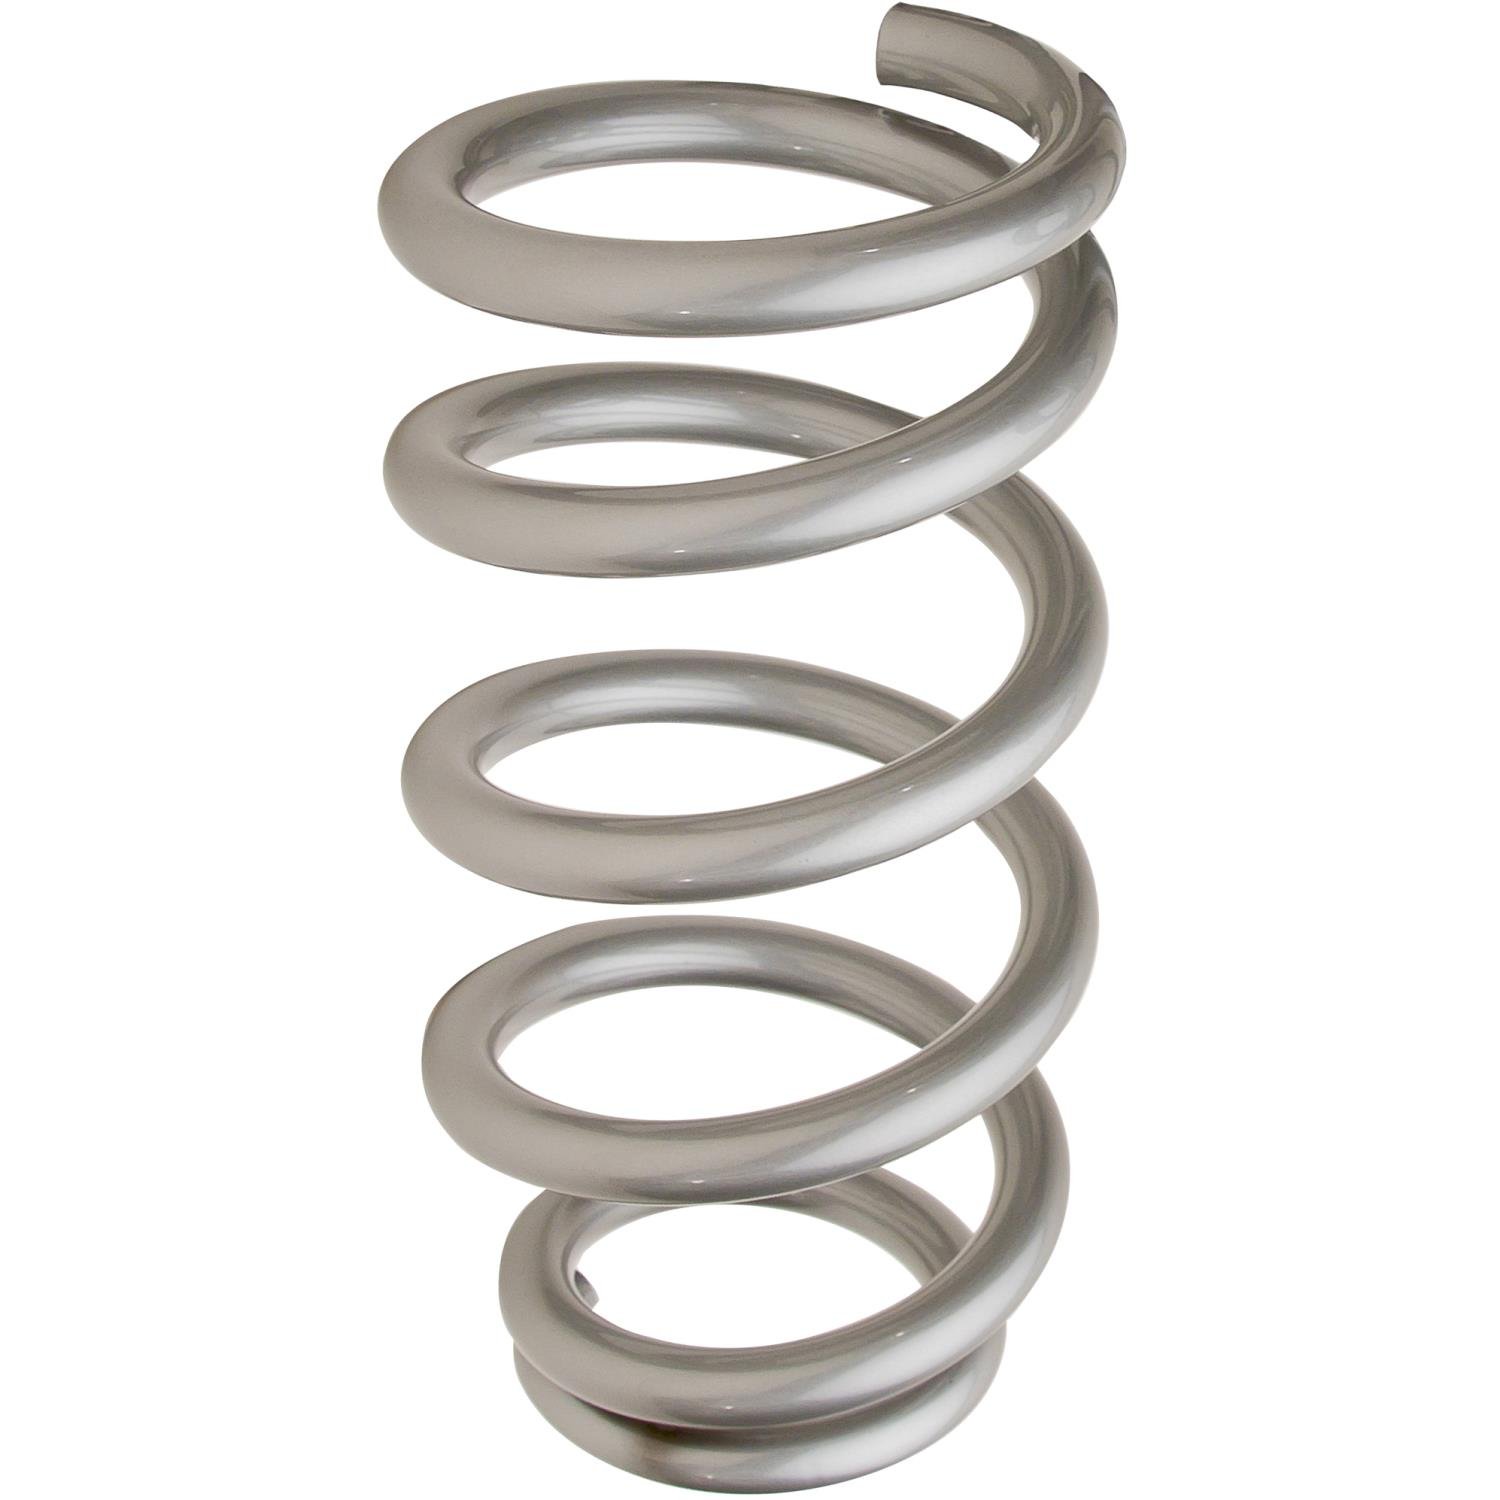 GM Style Flat & Ground High-Tensile Spring 10